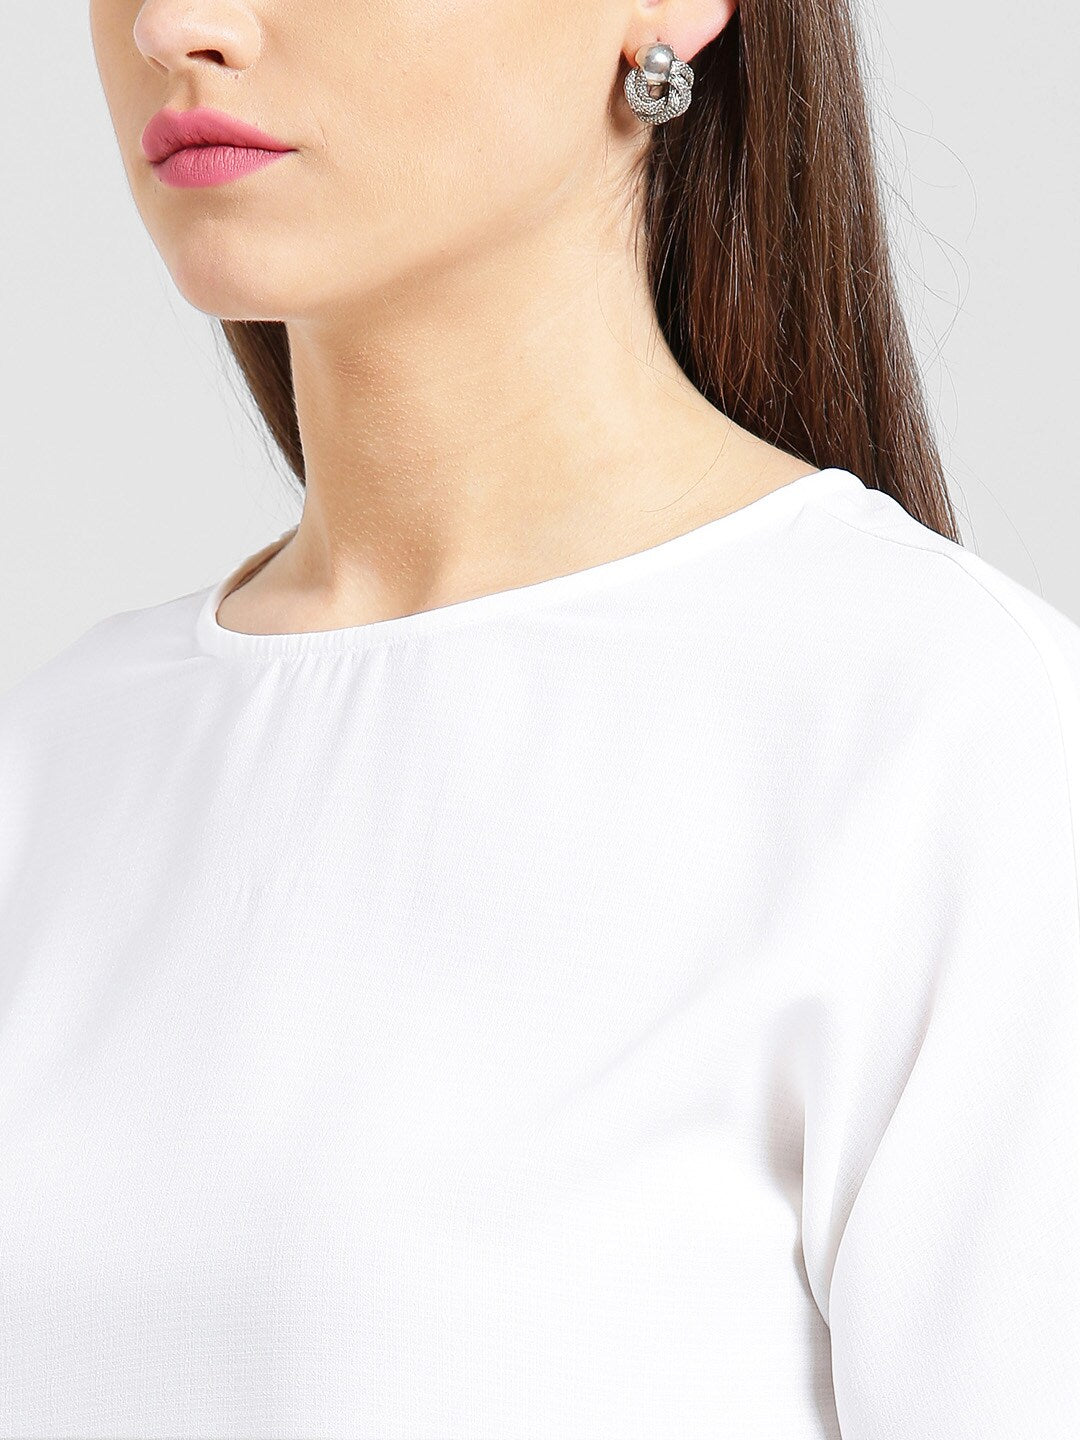 BeIndi Women Solid Off White Top